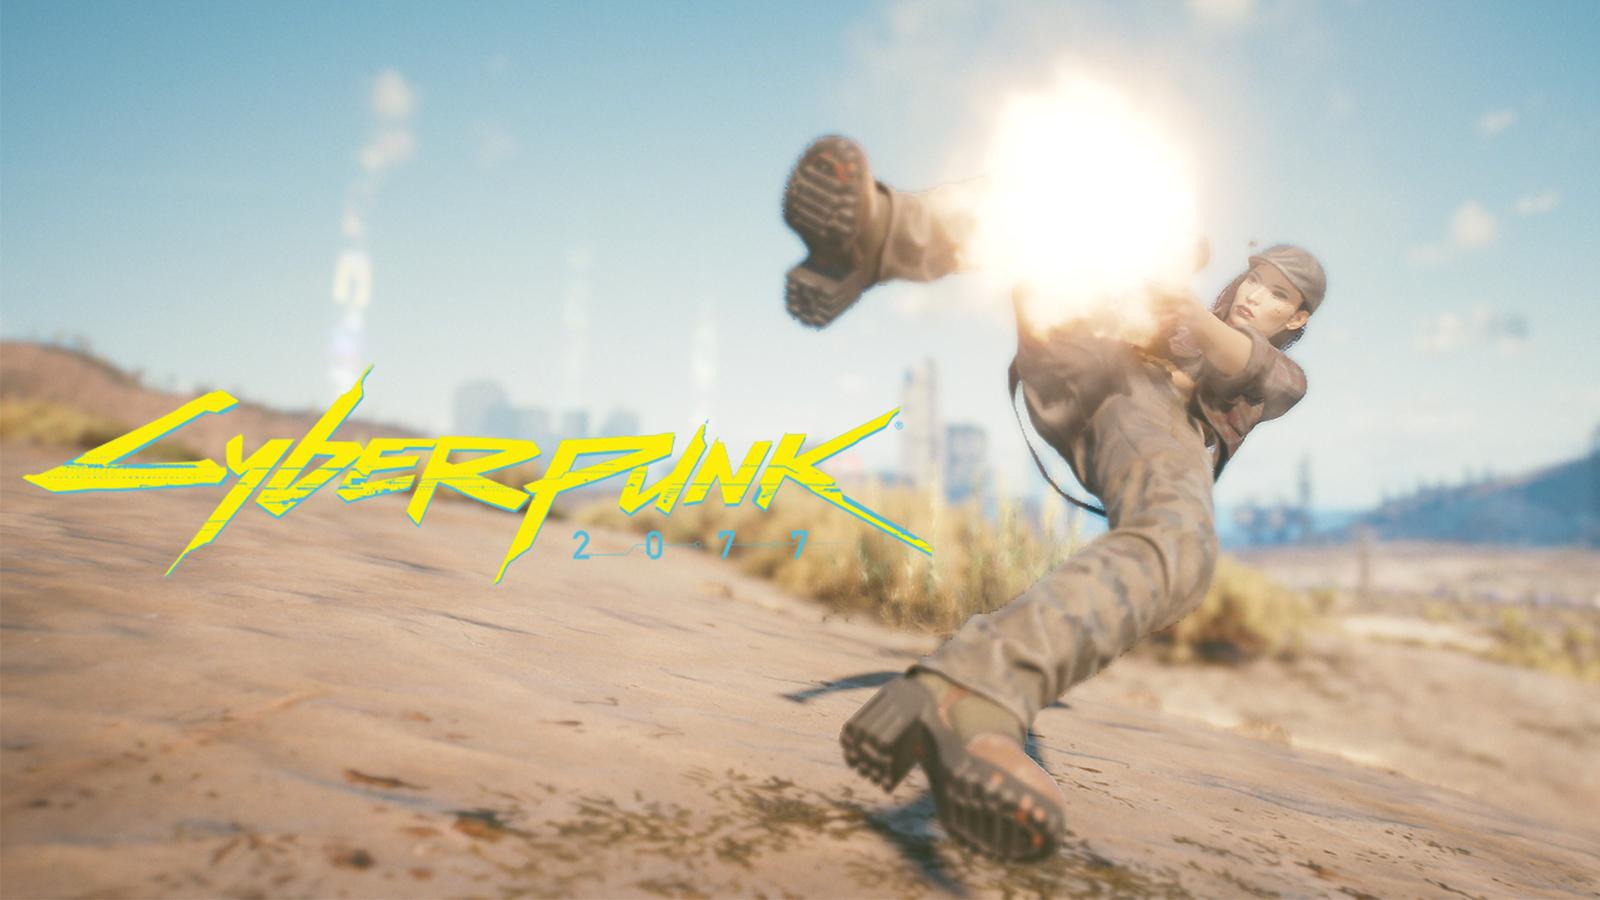 Cyberpunk 2077 third-person mod is great for walking - just don't